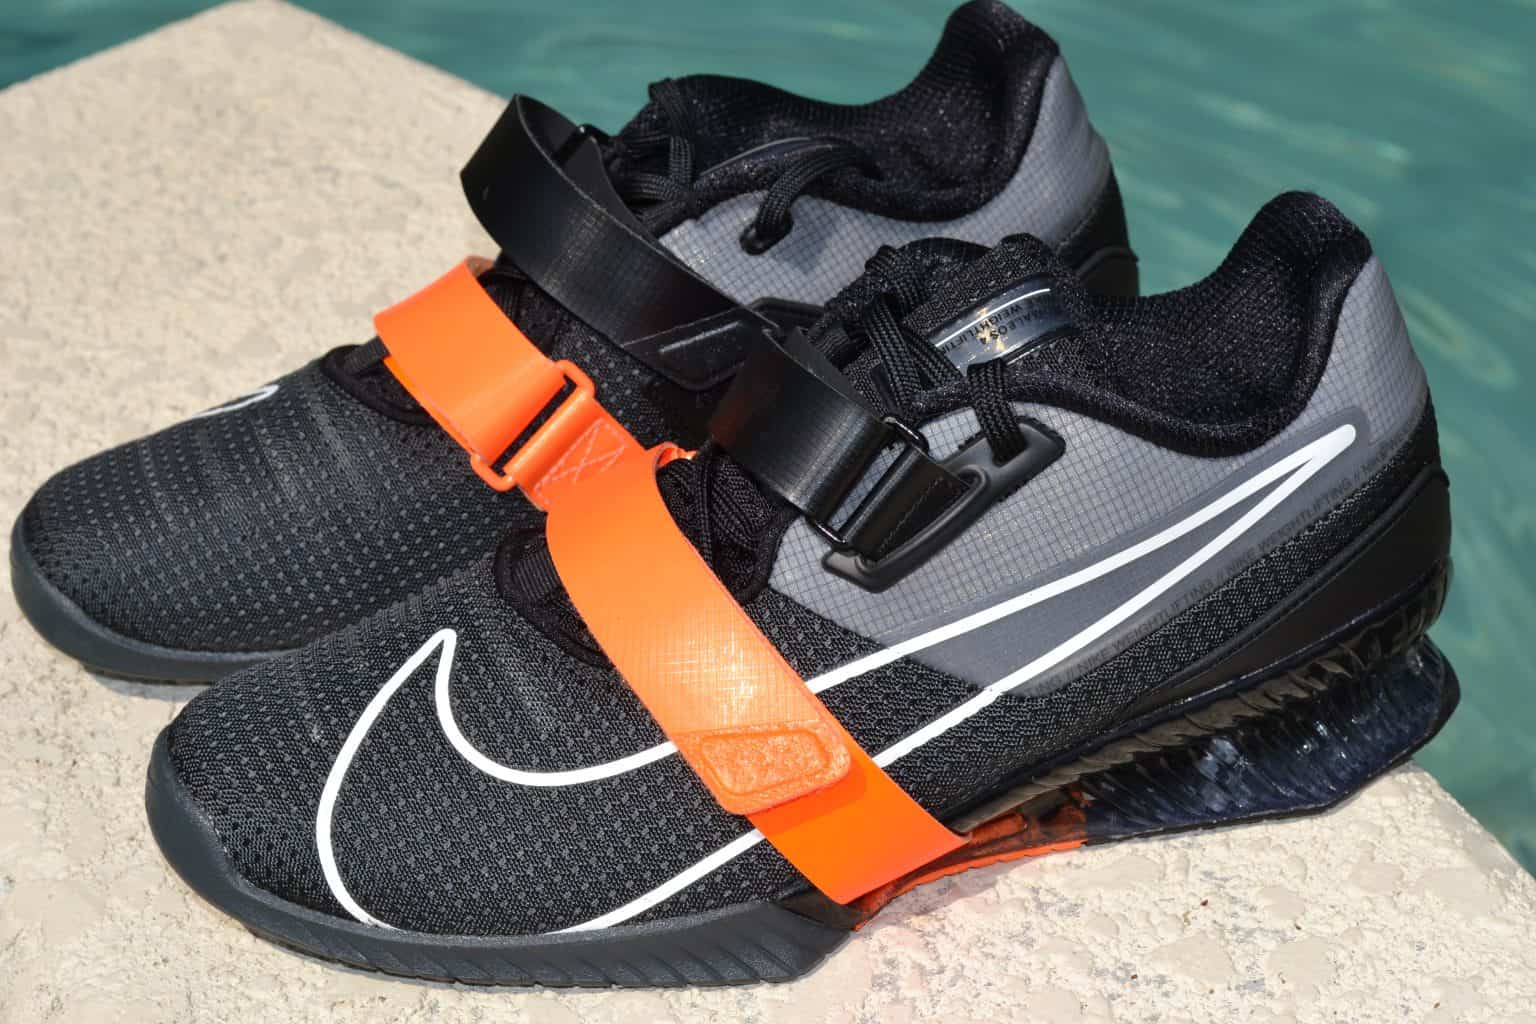 Nike Romaleos 4 Olympic Weightlifting Shoe Review Fit at Midlife